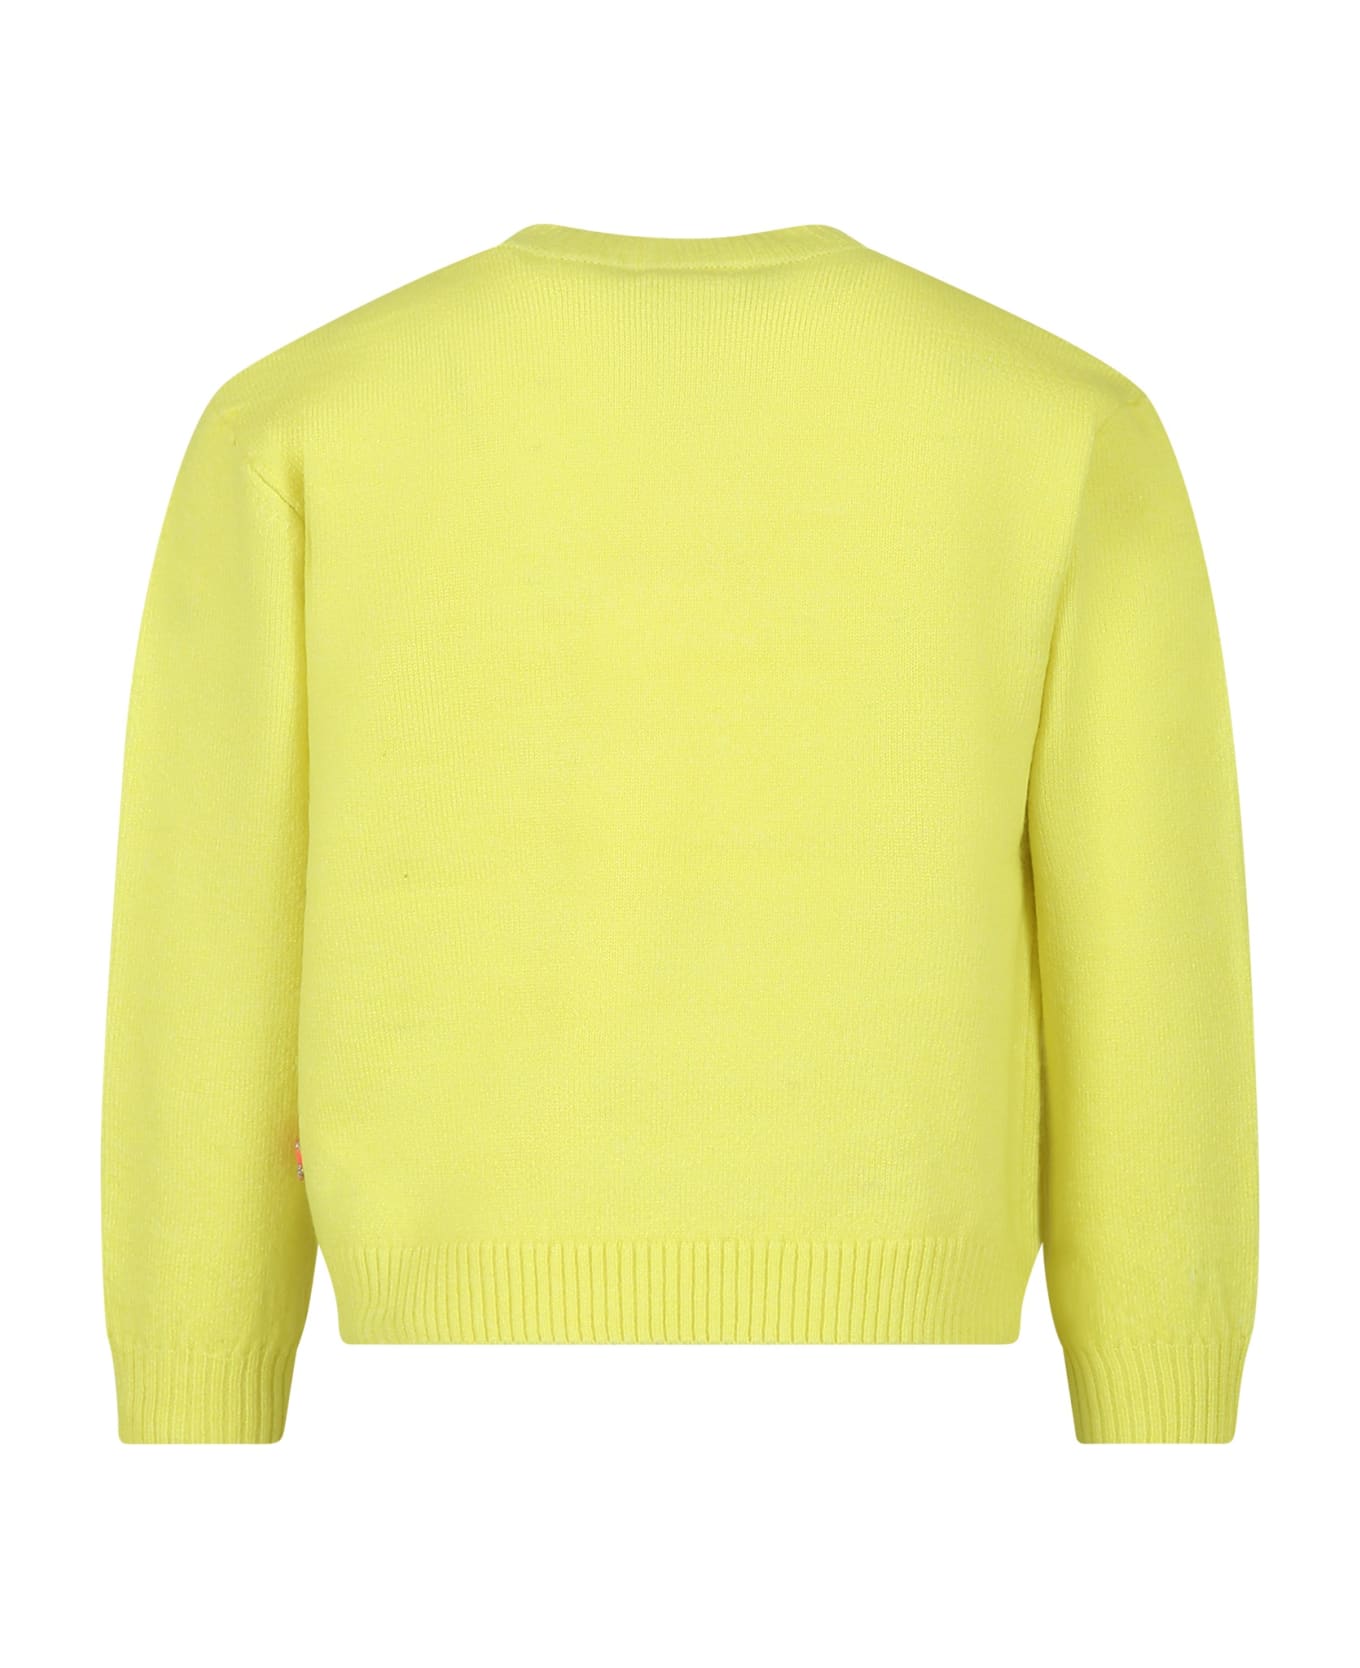 Billieblush Yellow Sweater For Girl With Multicolor Writing - Yellow